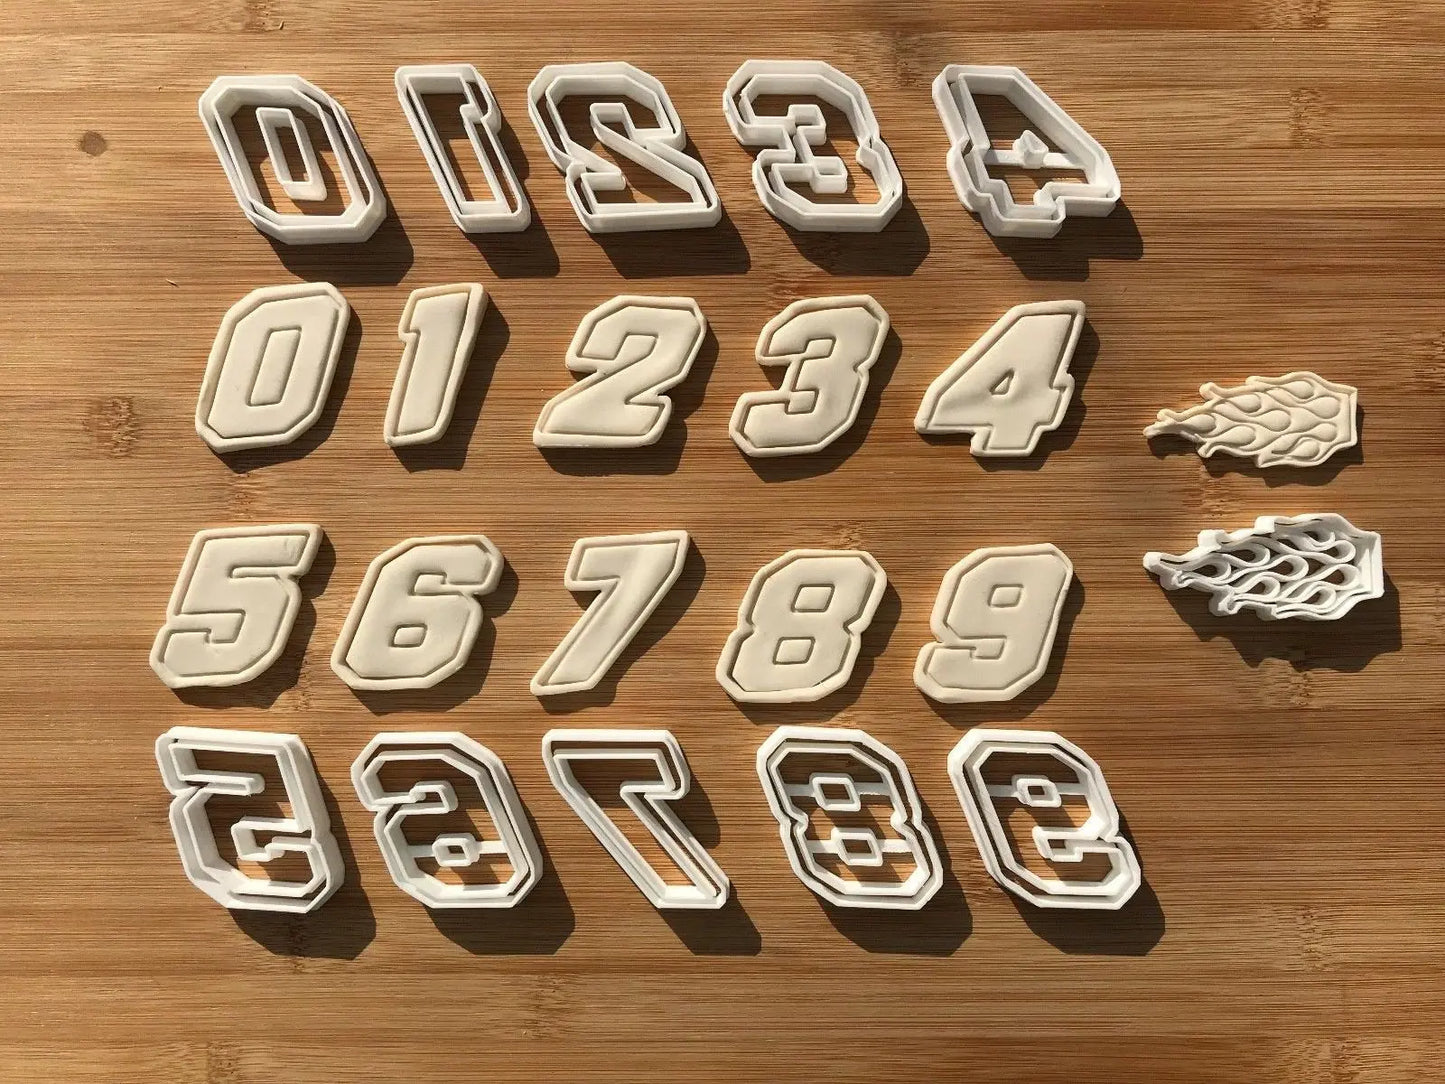 Three 3 Racing Number Digit Cookie Cutter Dough Biscuit Pastry Fondant MEG cookie cutters